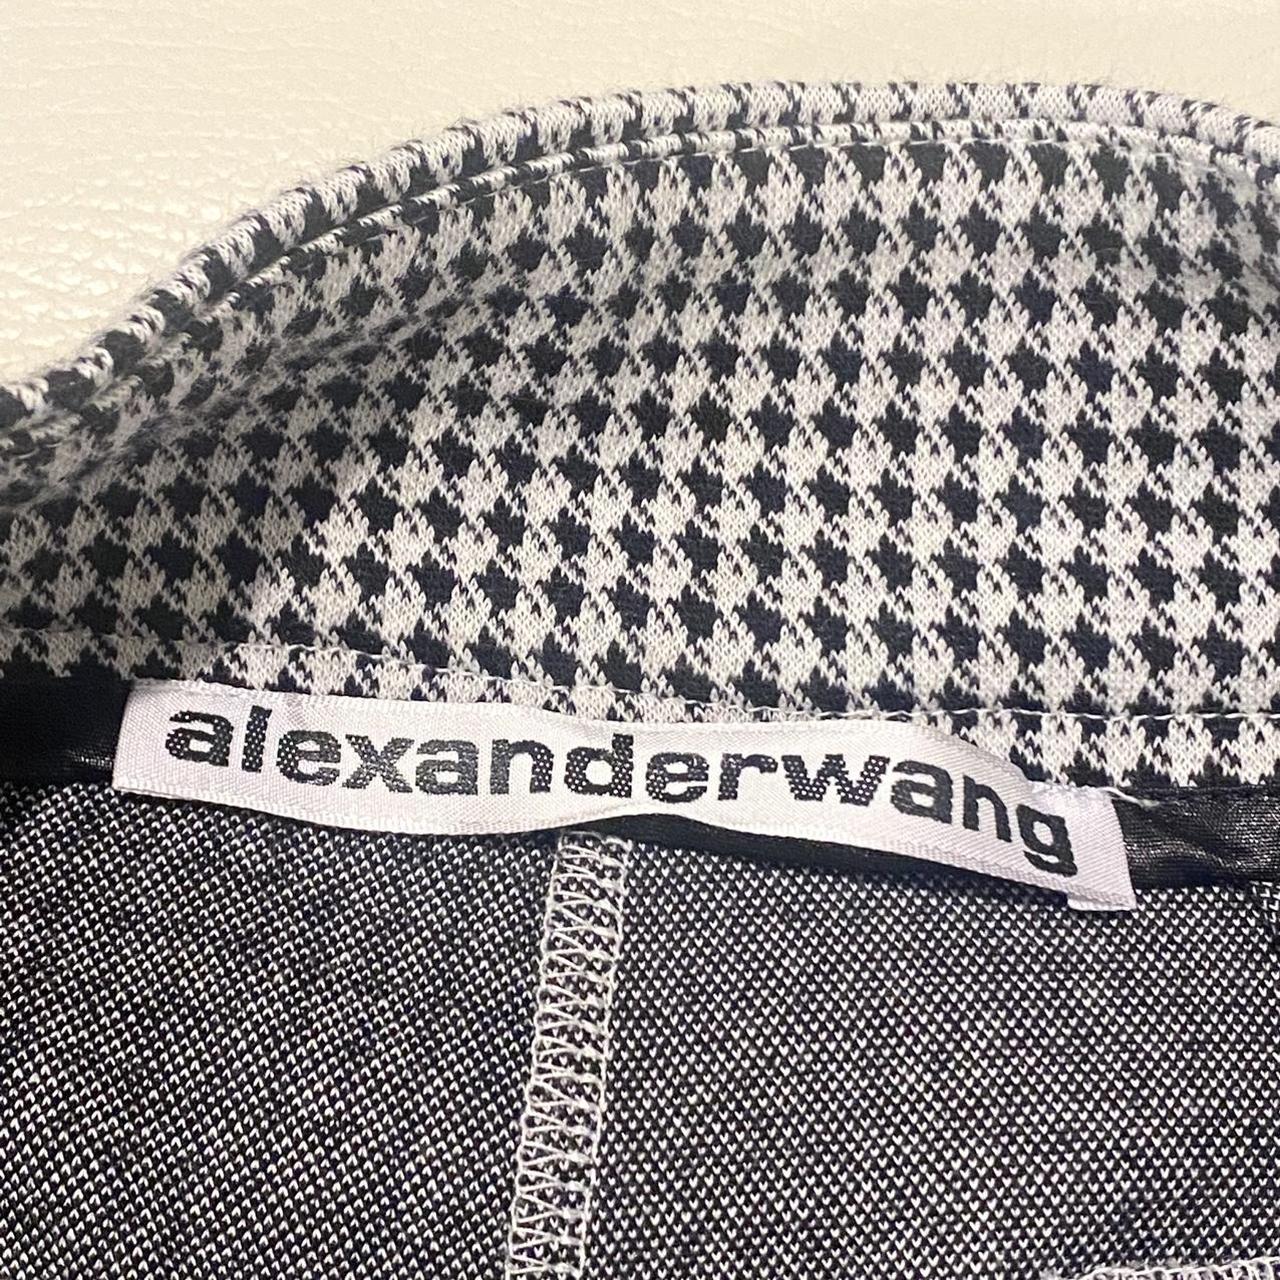 Alexander Wang houndstooth shorts ️ Authentic ️... - Depop